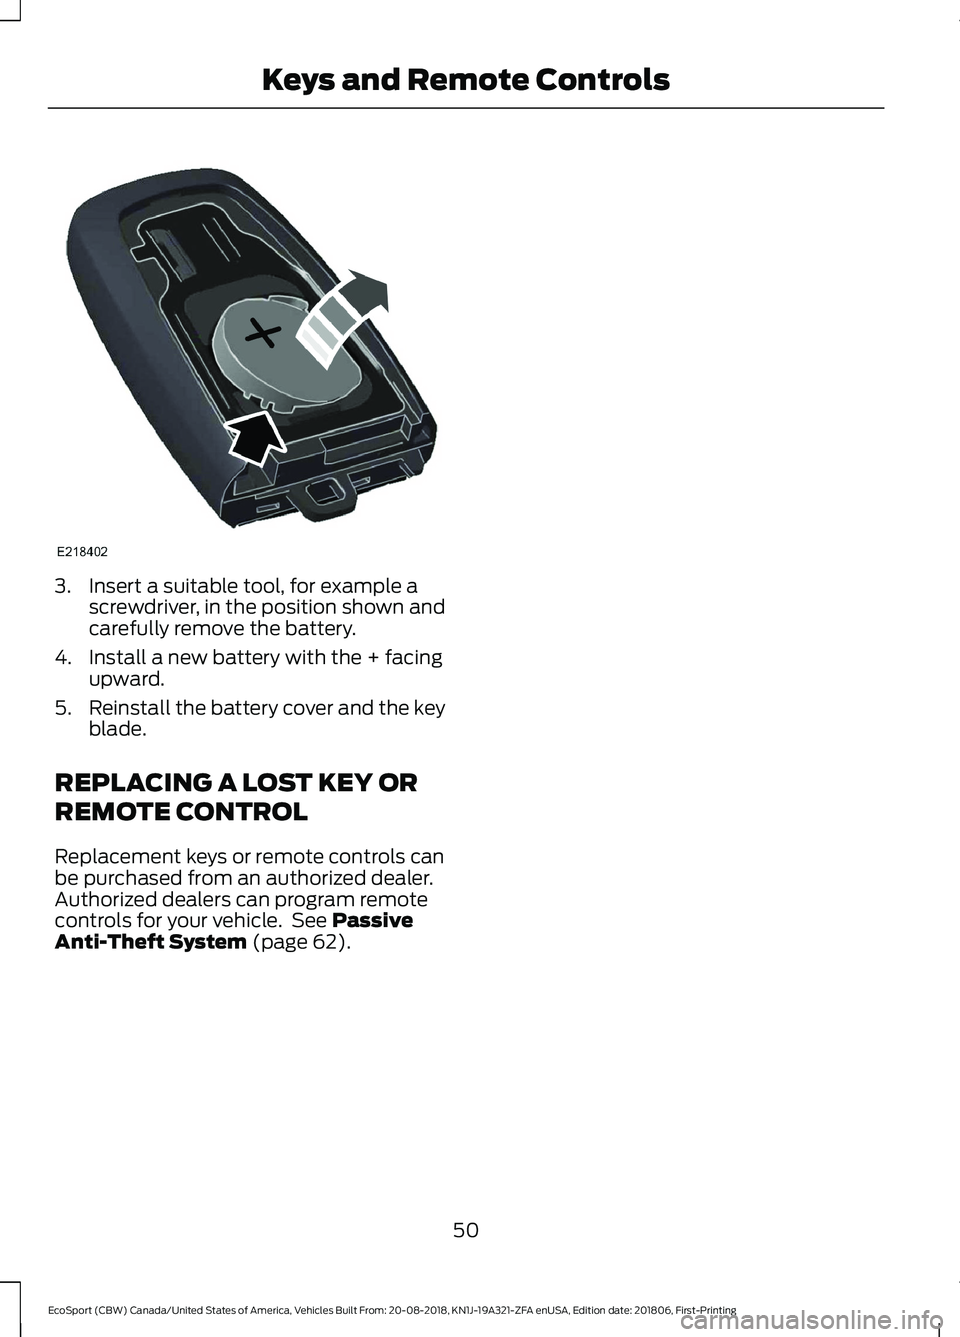 FORD ECOSPORT 2019  Owners Manual 3.Insert a suitable tool, for example ascrewdriver, in the position shown andcarefully remove the battery.
4.Install a new battery with the + facingupward.
5.Reinstall the battery cover and the keybla